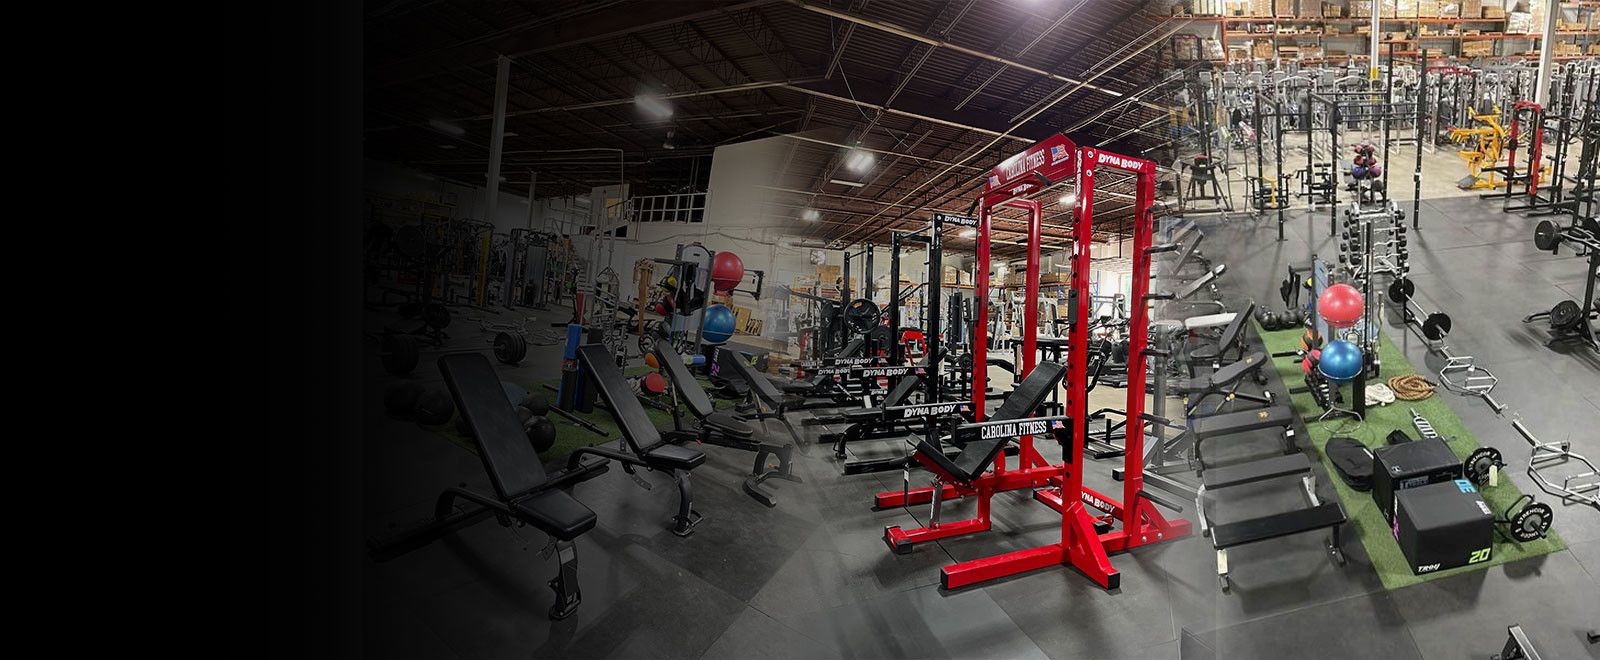 new and used gym equipment | Home gym equipment | New and used cardio equipment